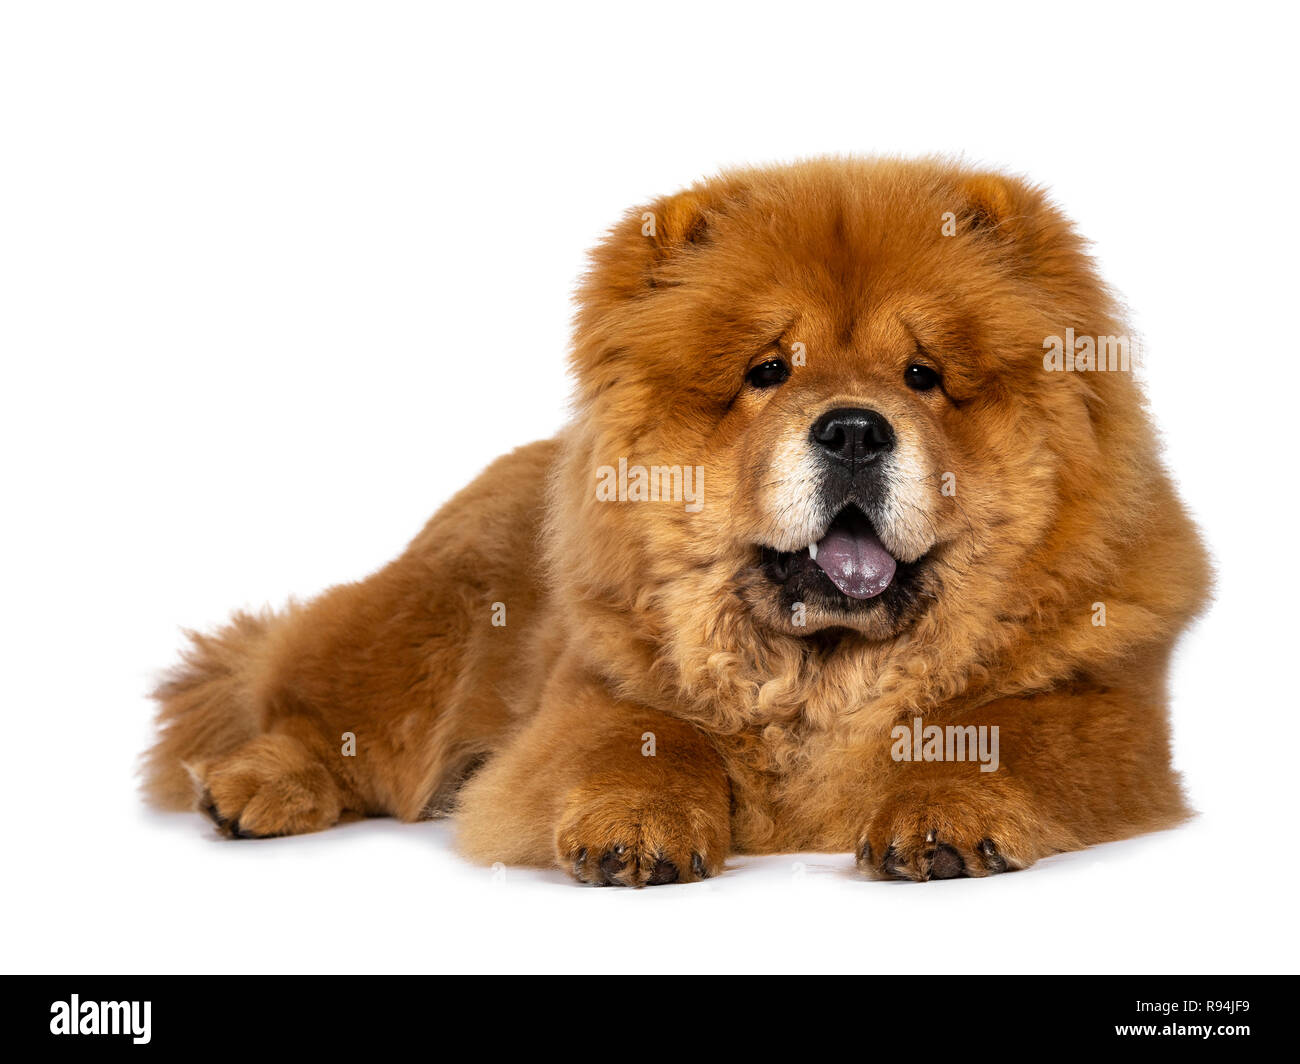 Cute fluffy Chow Chow pup dog, laying down facing front looking at camera. Isolated on a white background. Mouth open, showing blue tongue. Stock Photo